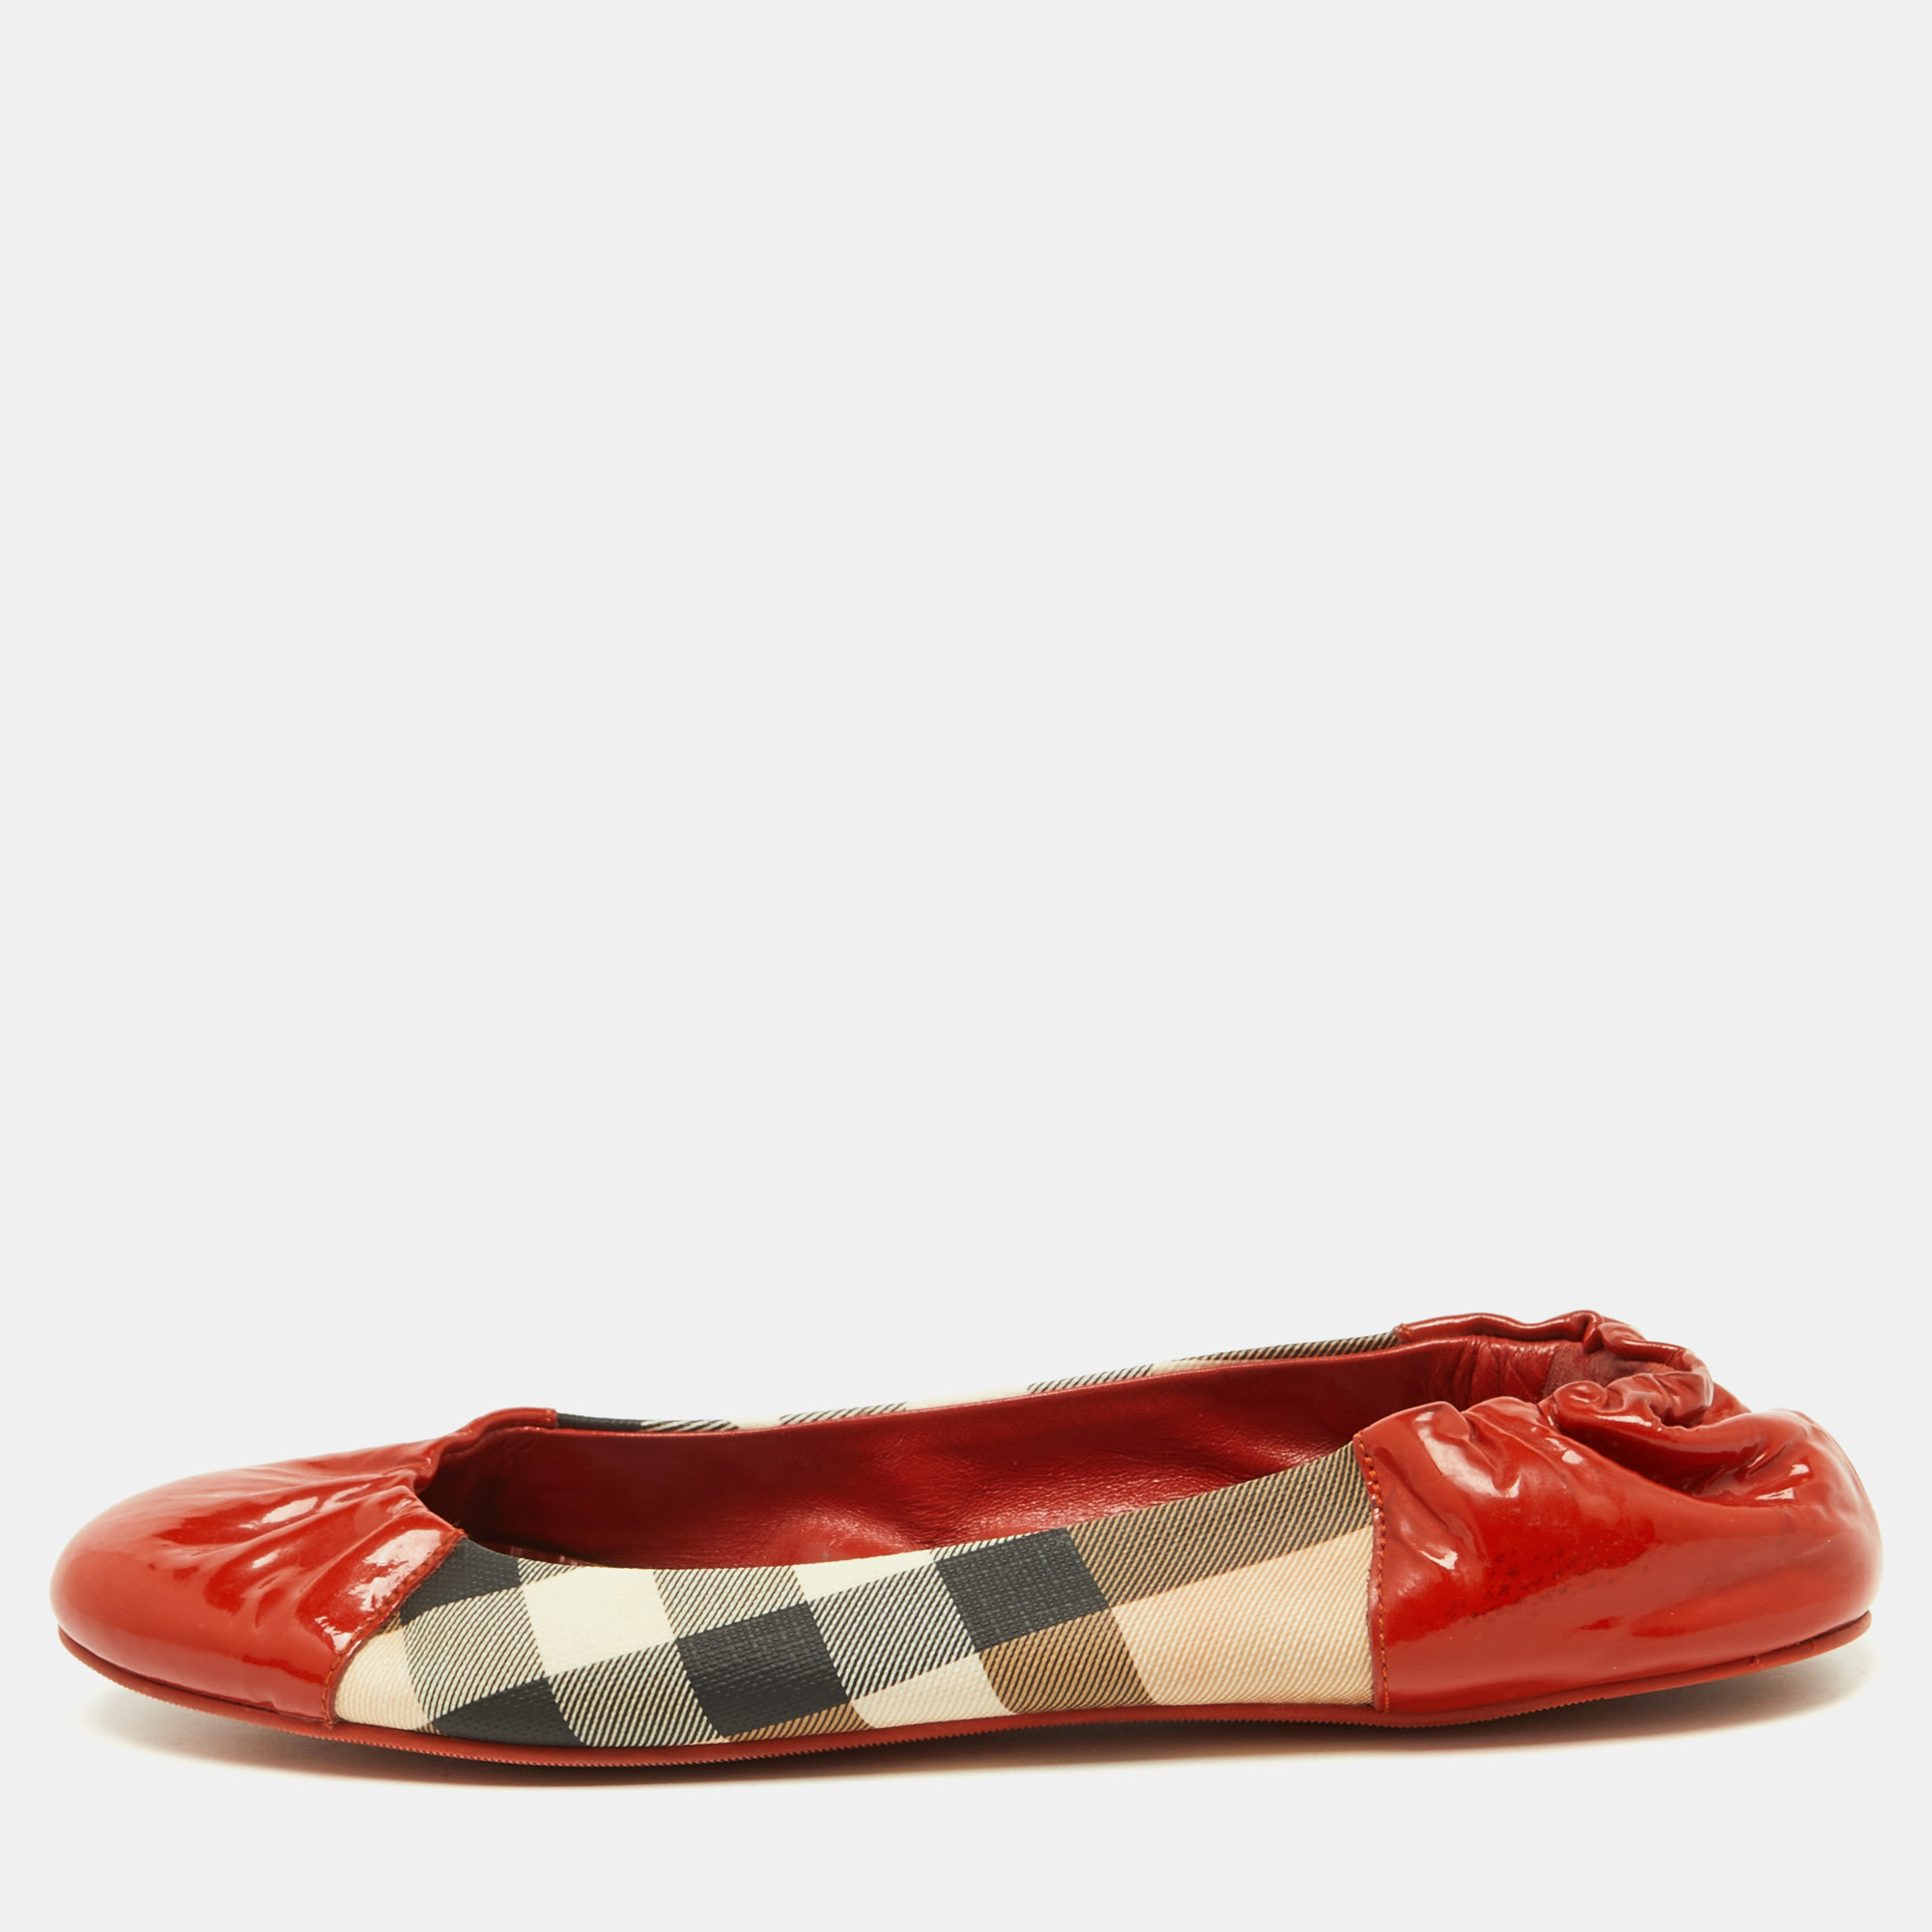 

Burberry Orange/Beige Patent Leather and Nova Check Coated Canvas Scrunch Ballet Flats Size